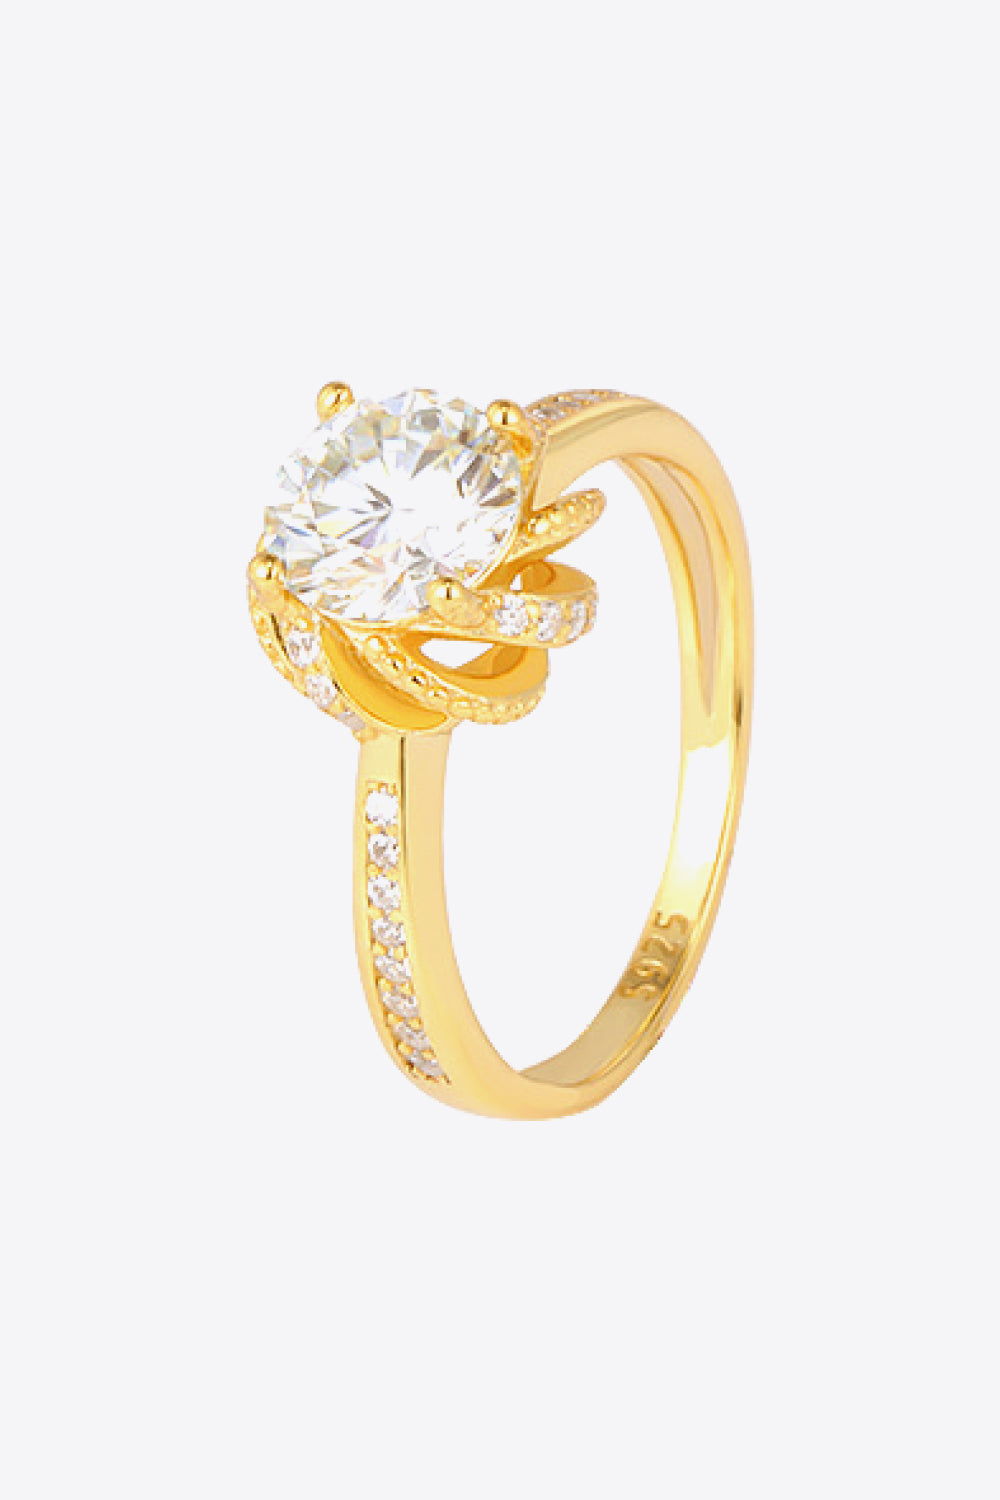 Kiss Me Once Moissanite Ring - Tophatter Deals